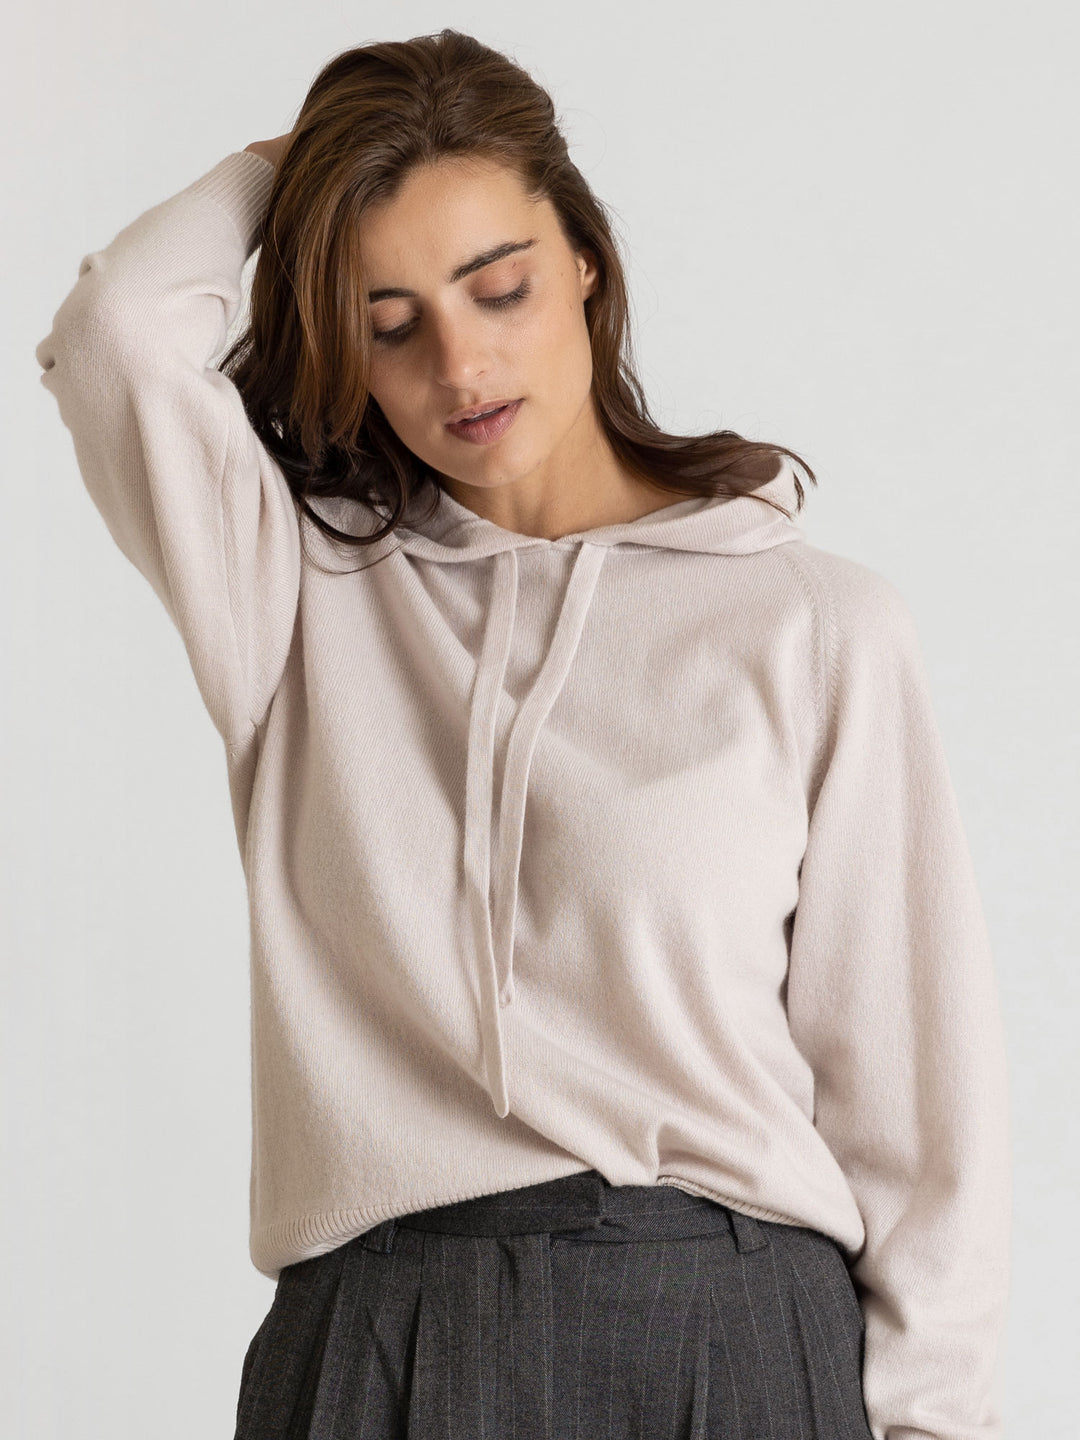 cashmere hoodie 100% pure cashmere. Color pearl, beige.